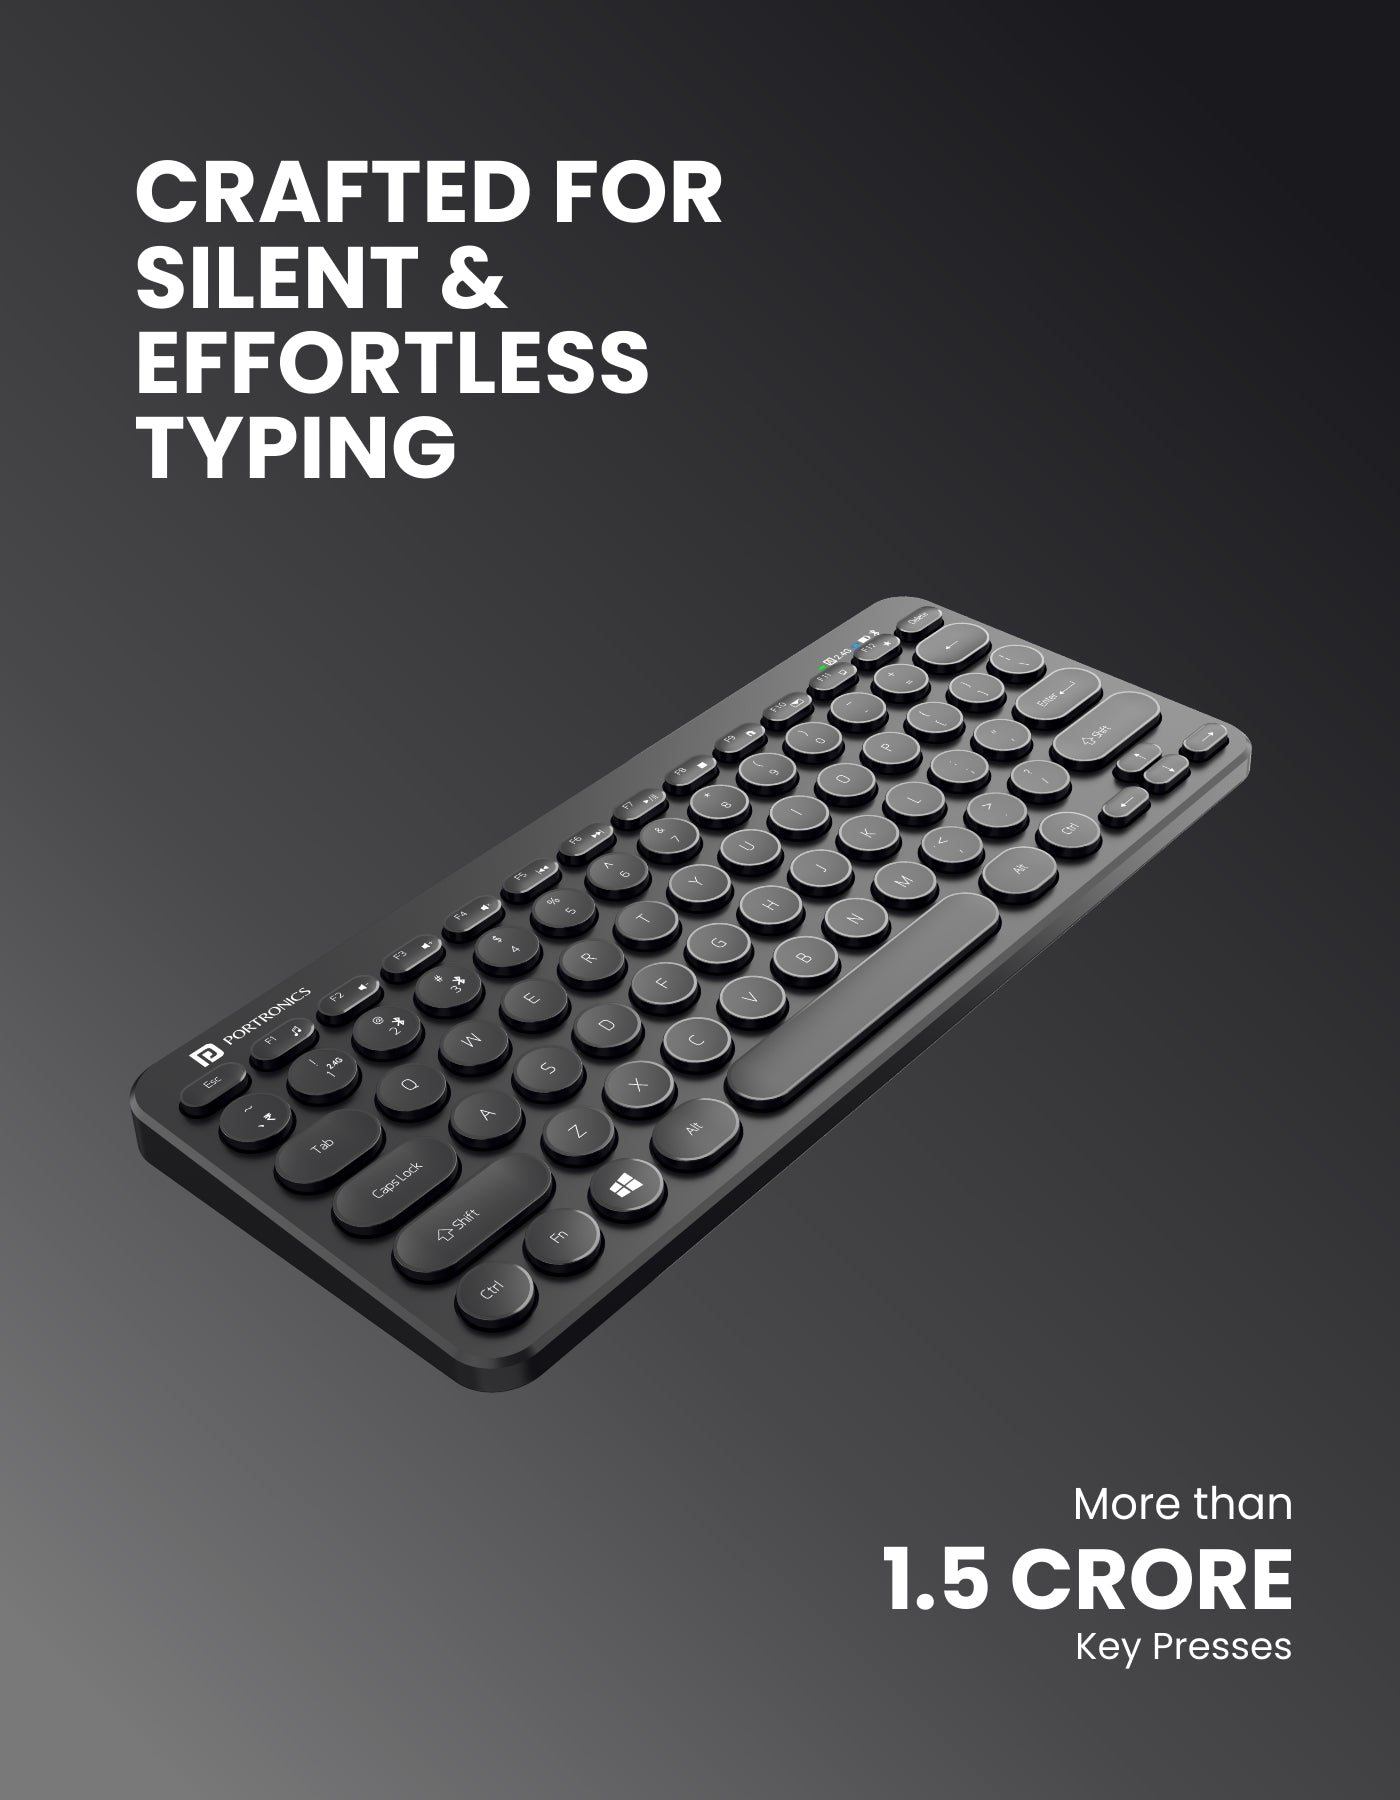 Portronics Bubble Wireless laptop keyboard for silent and effortless typing